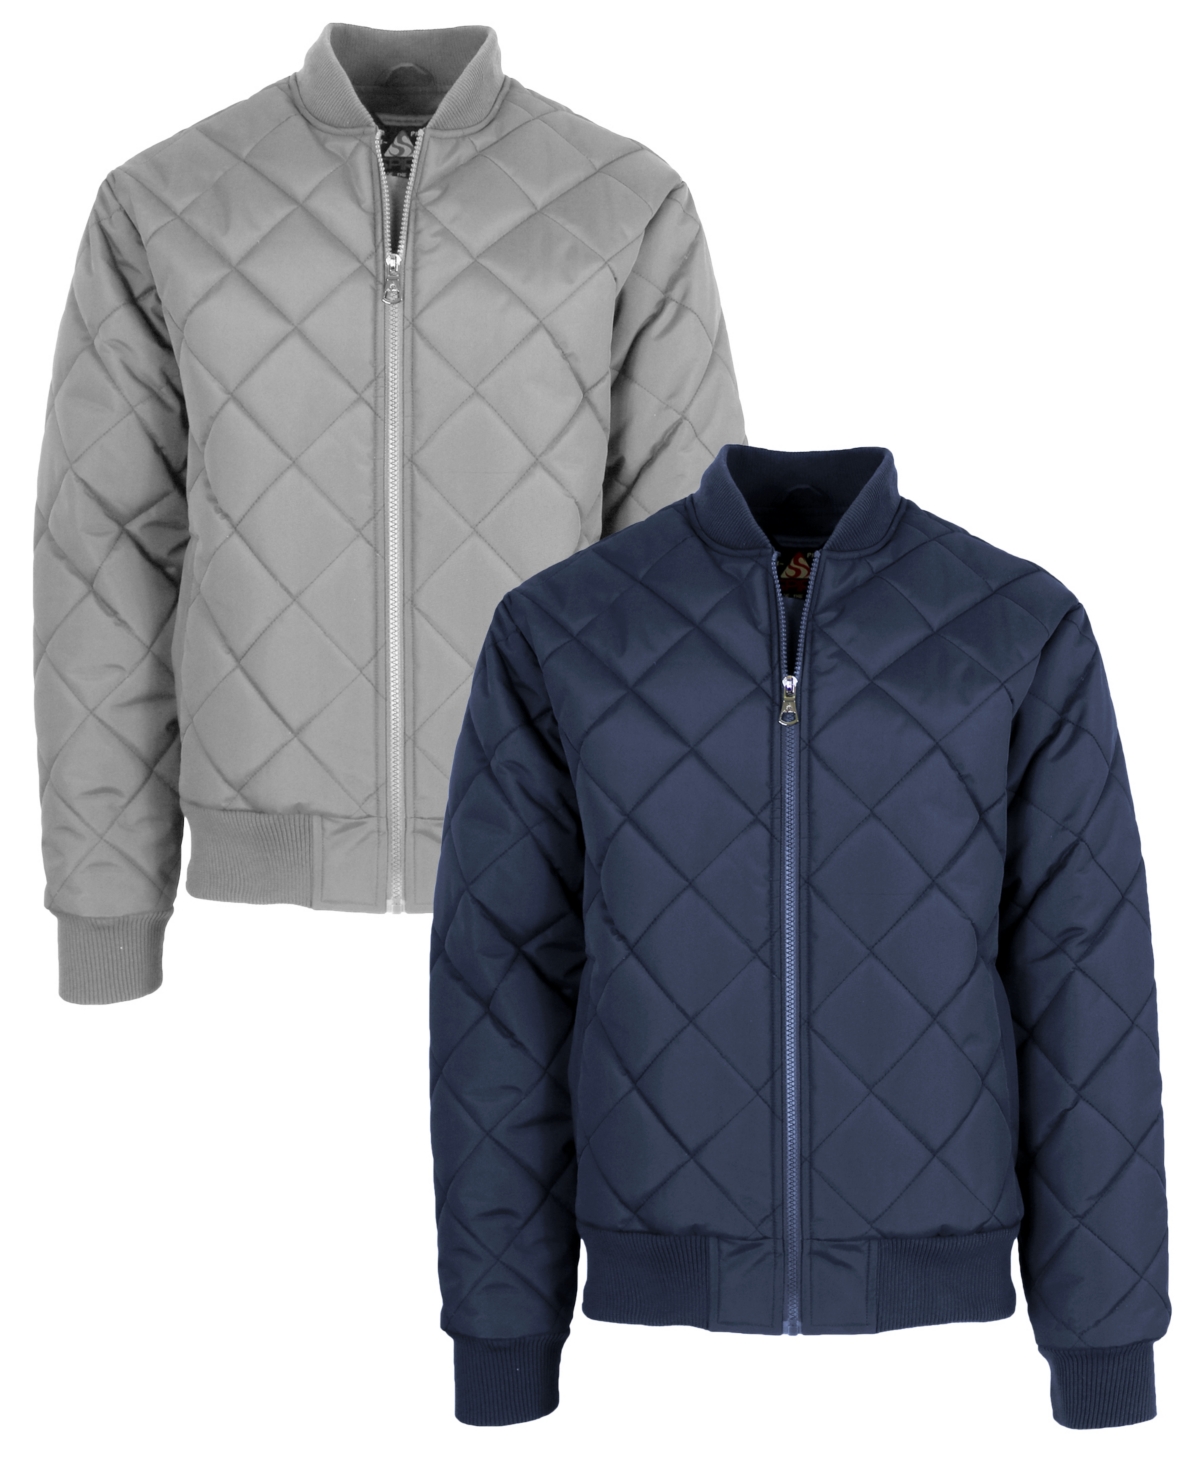 Spire By Galaxy Men's Quilted Bomber Jacket, Pack Of 2 In Heather Gray-navy